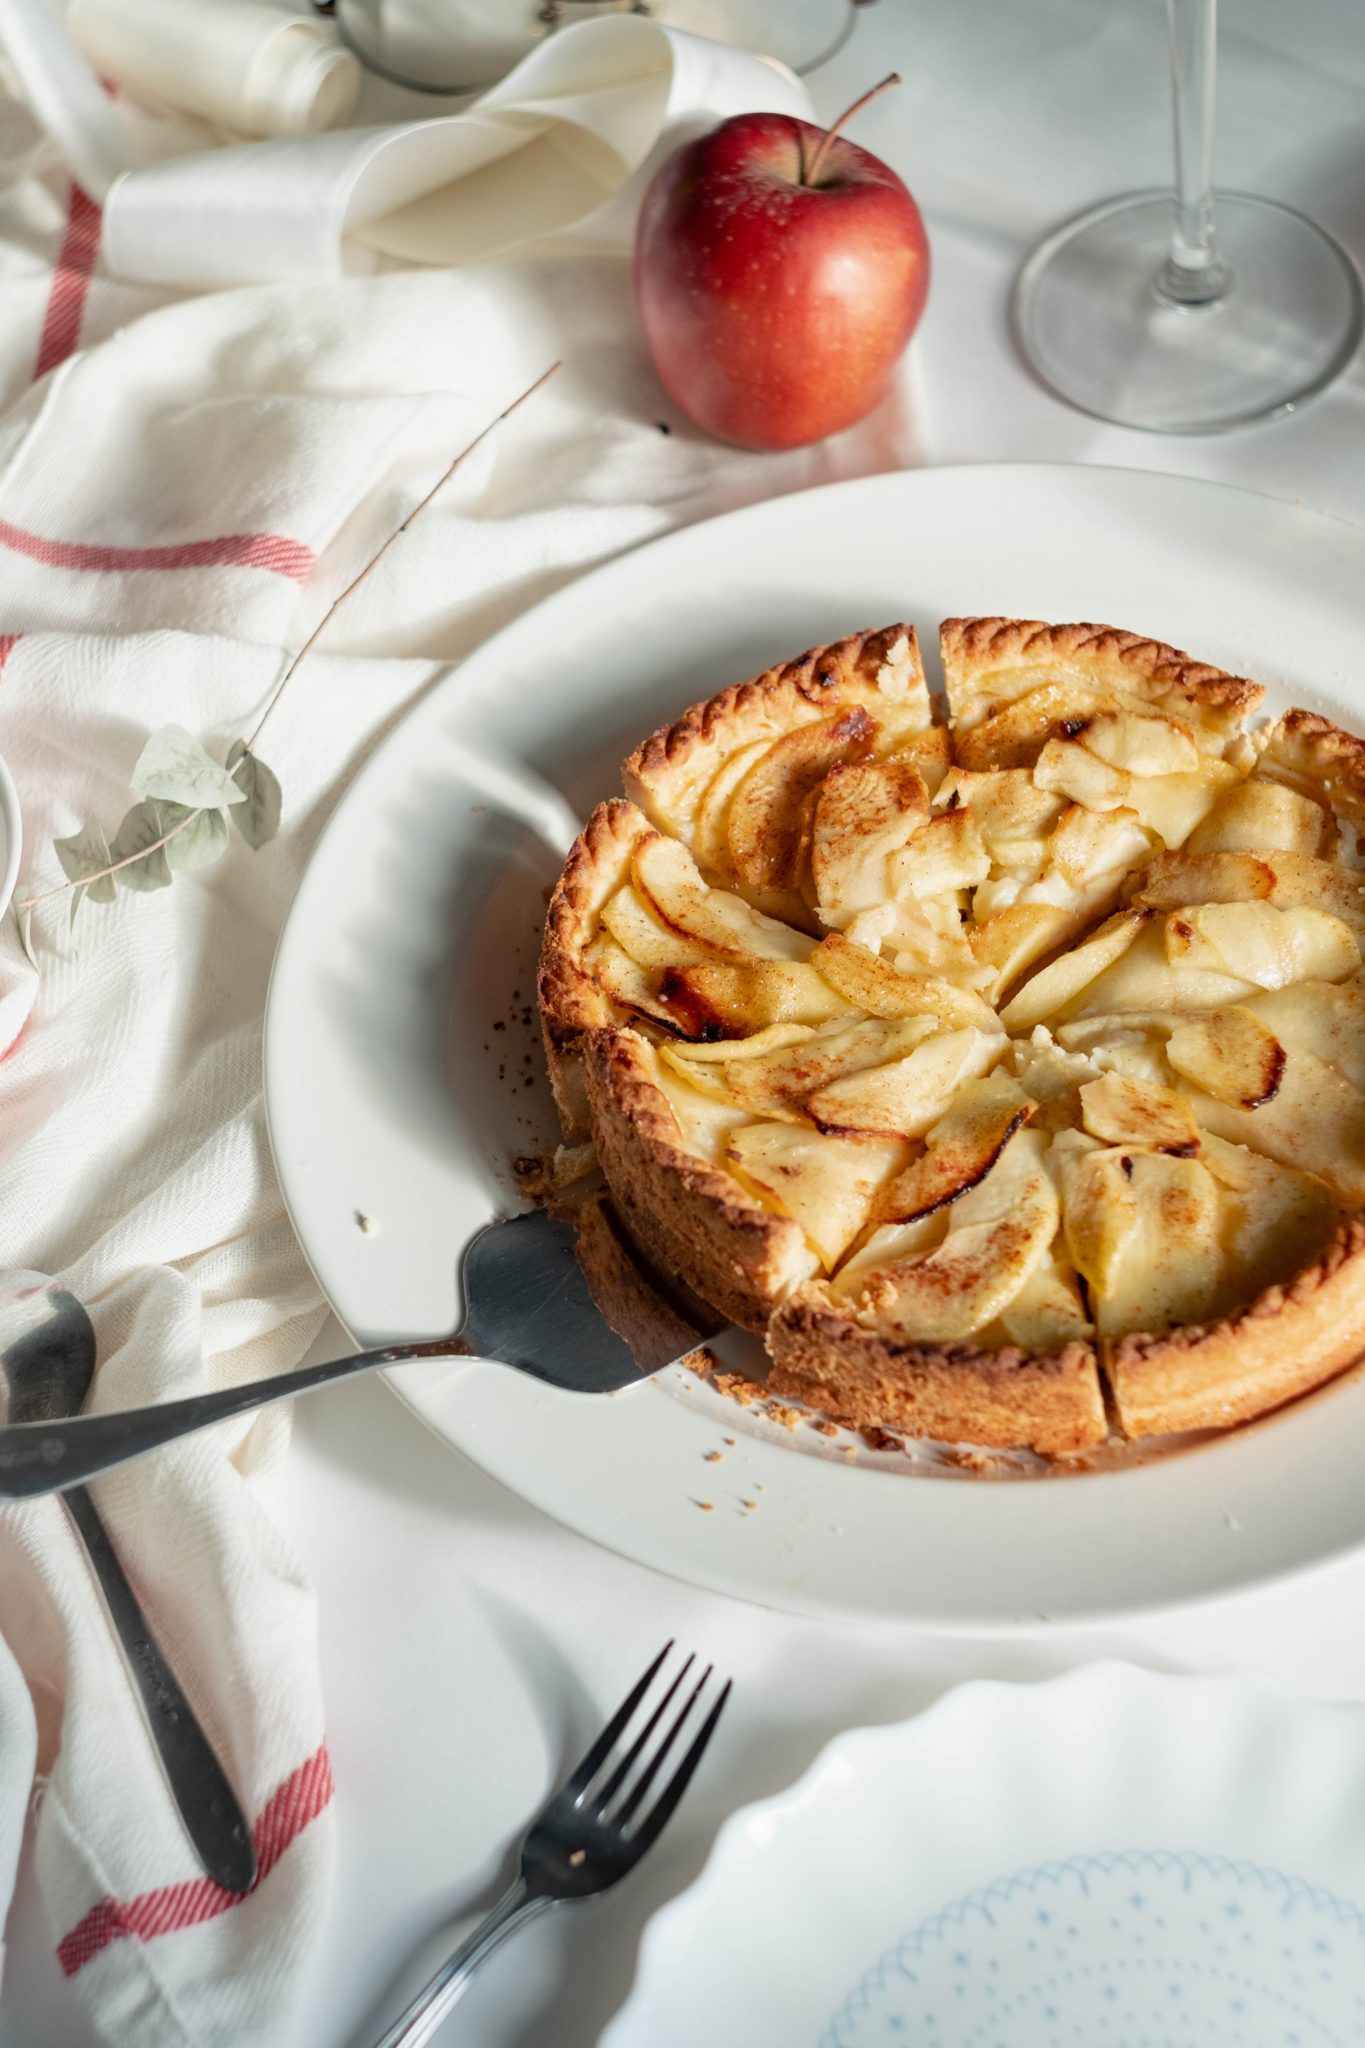 How To Make a Luscious Apple Pie - Cooking BeautifulLee